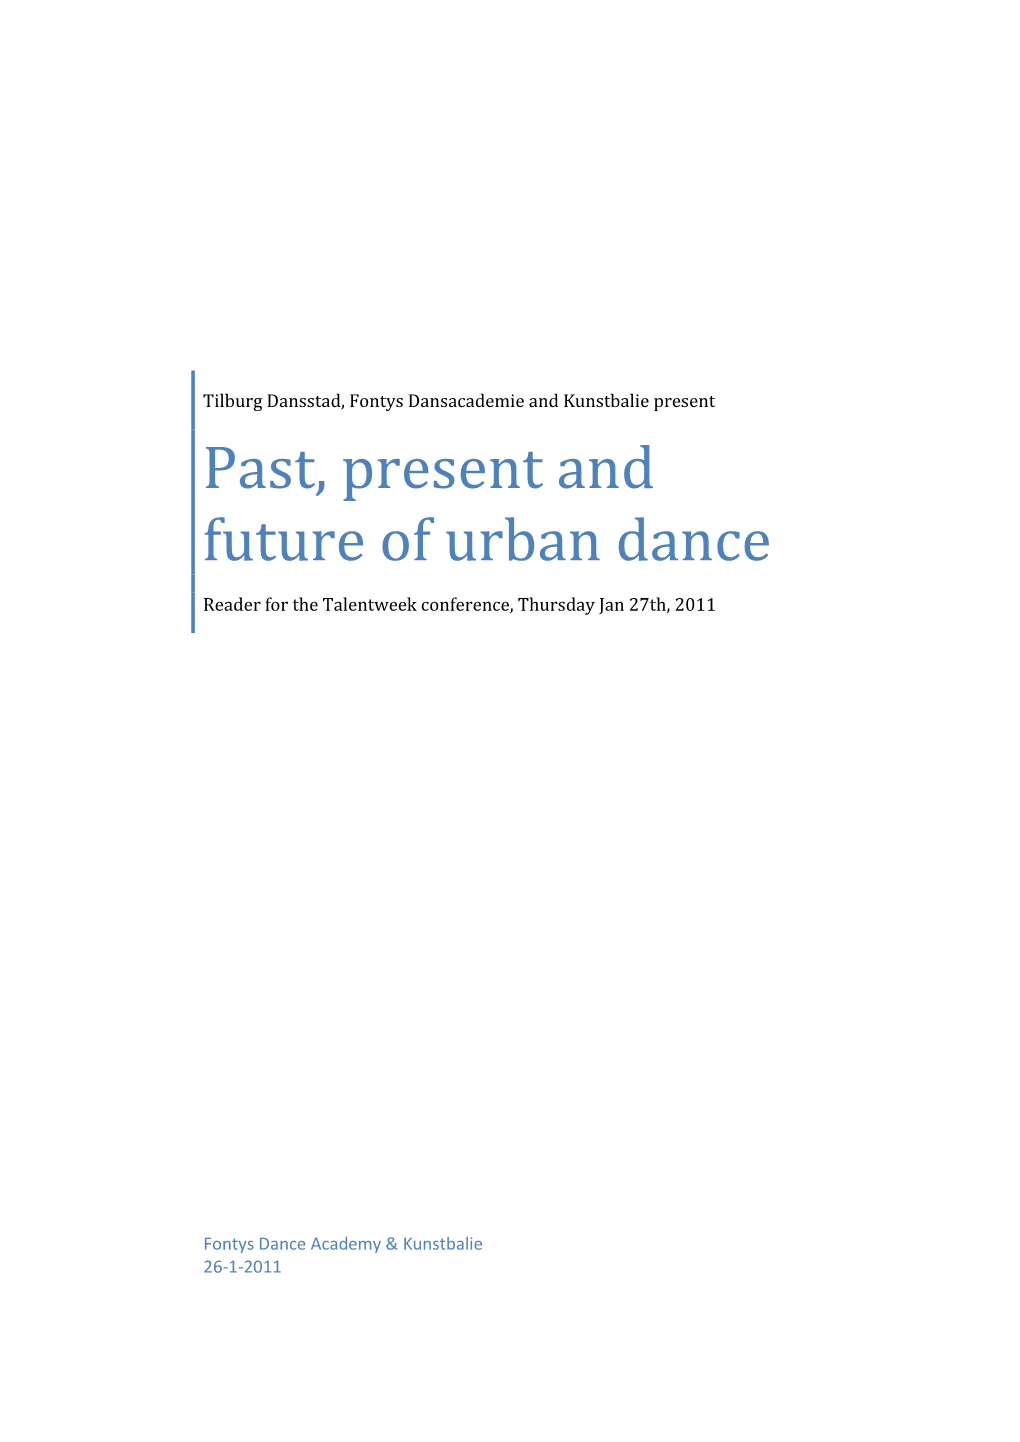 Past, Present and Future of Urban Dance